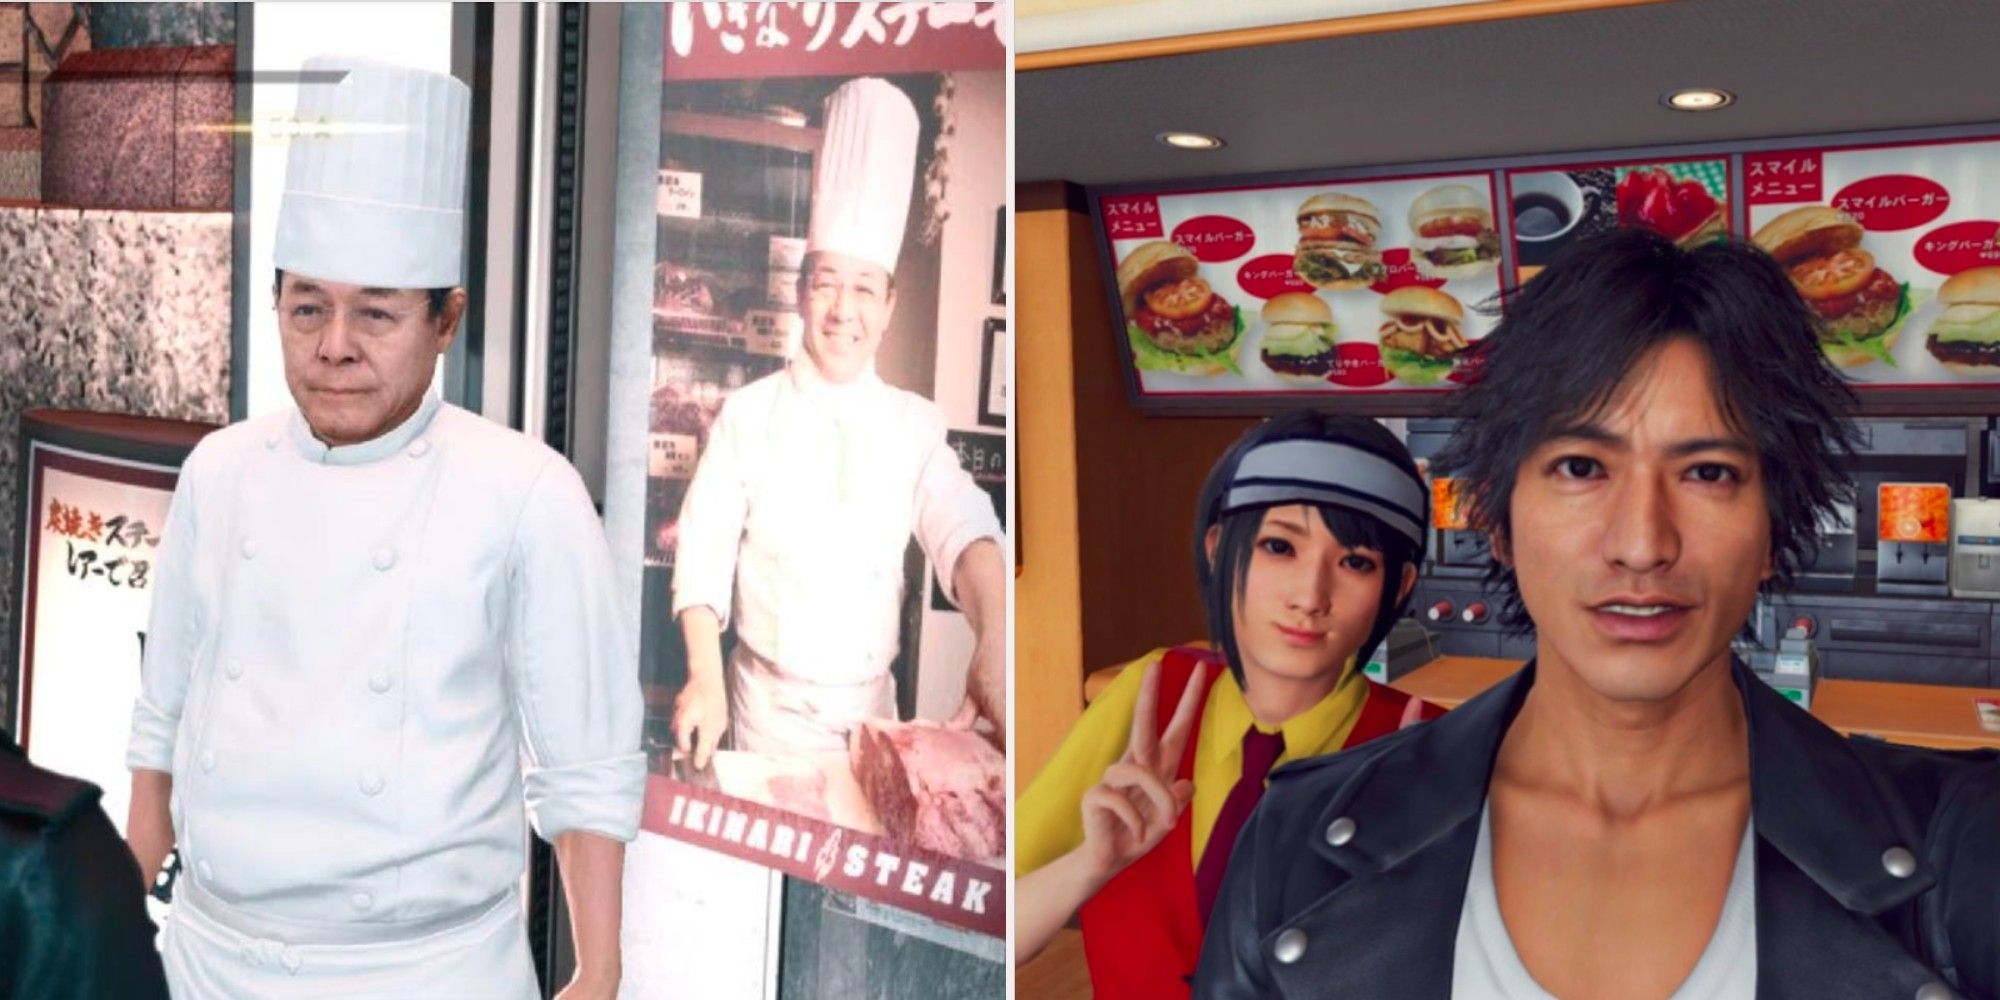 A collage showing the chef on the left and a worker on a burger store taking a selfie with the protagonist on the right.